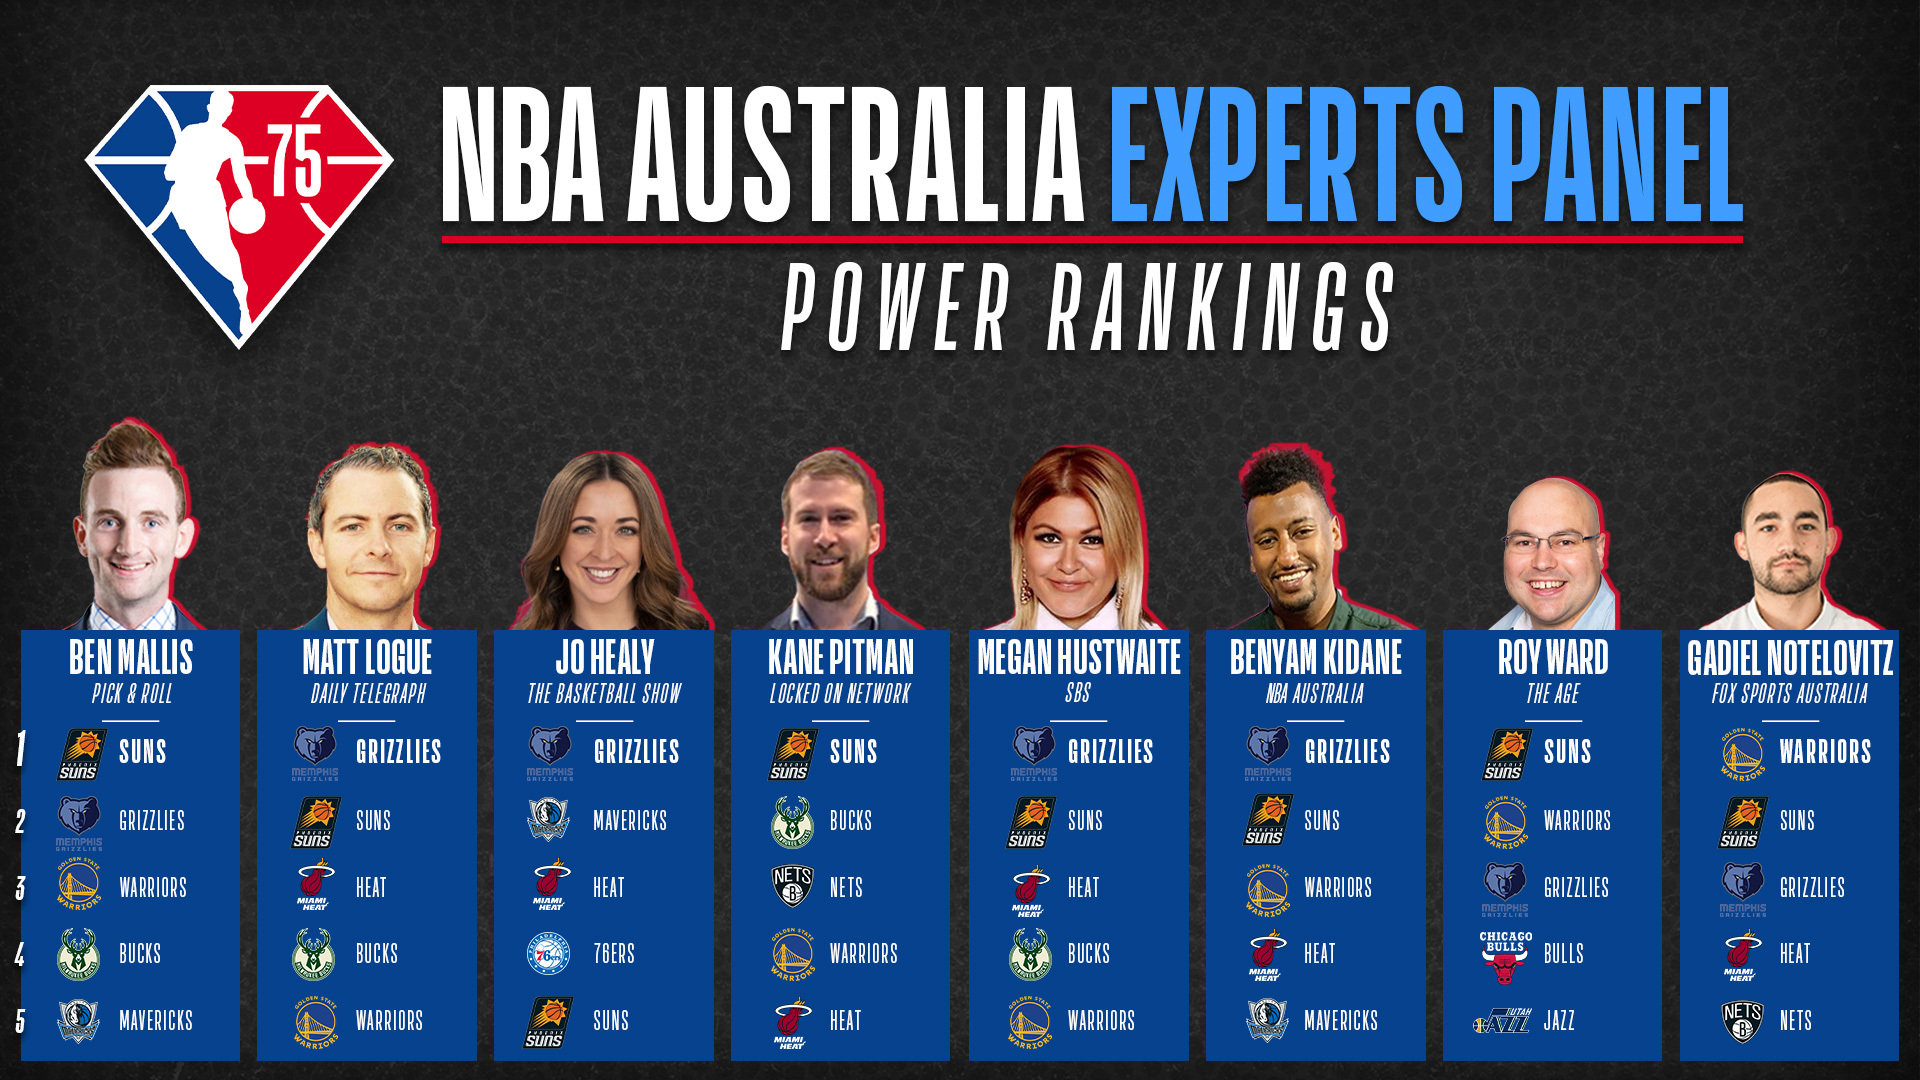 Experts Panel - Power Rankings